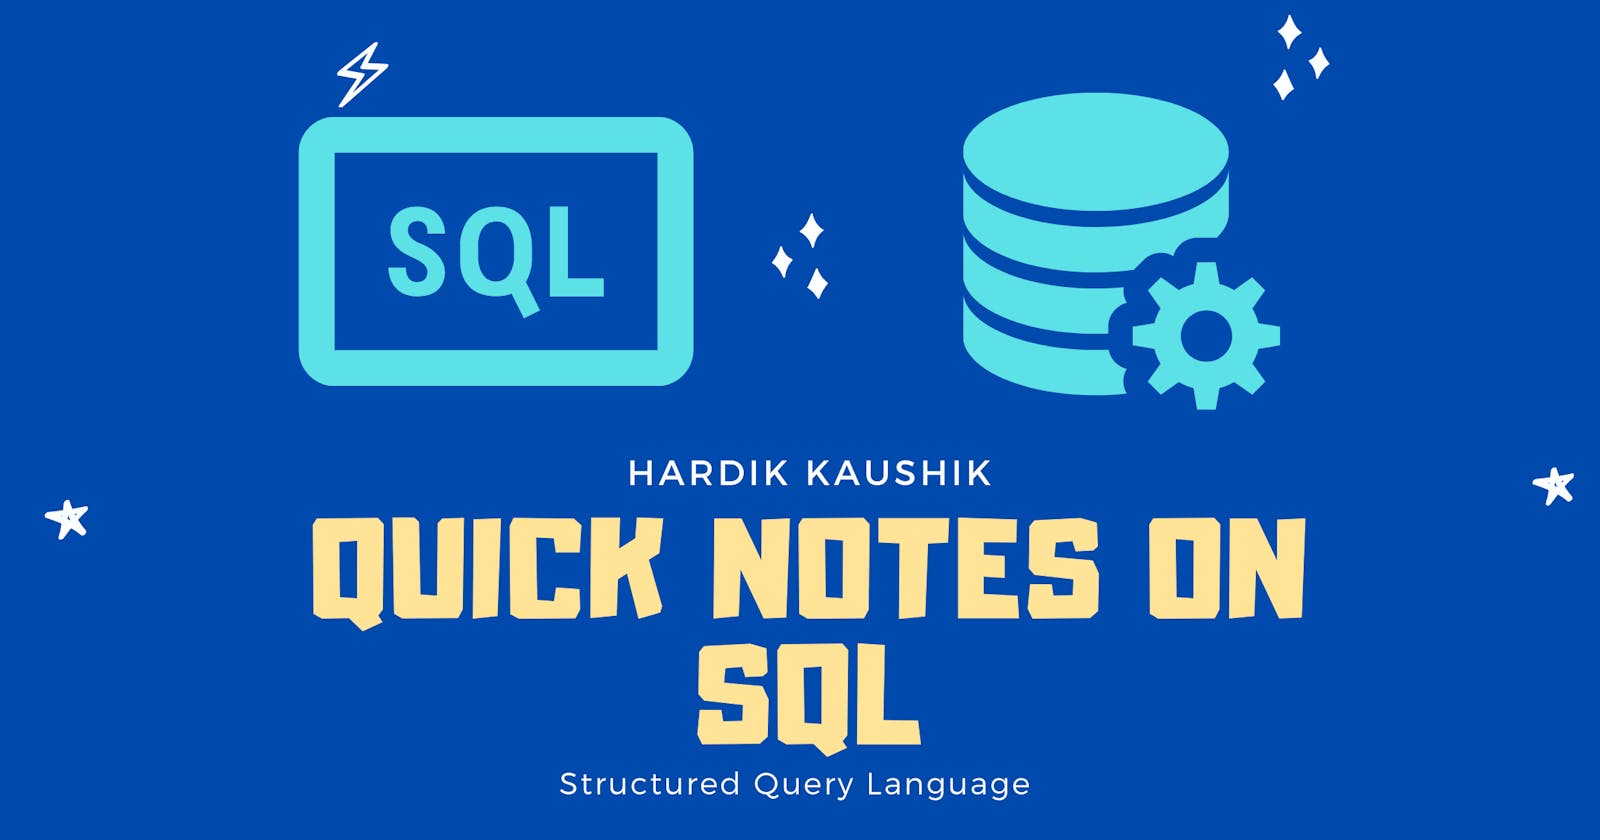 Quick notes on Structured Query Language (SQL)